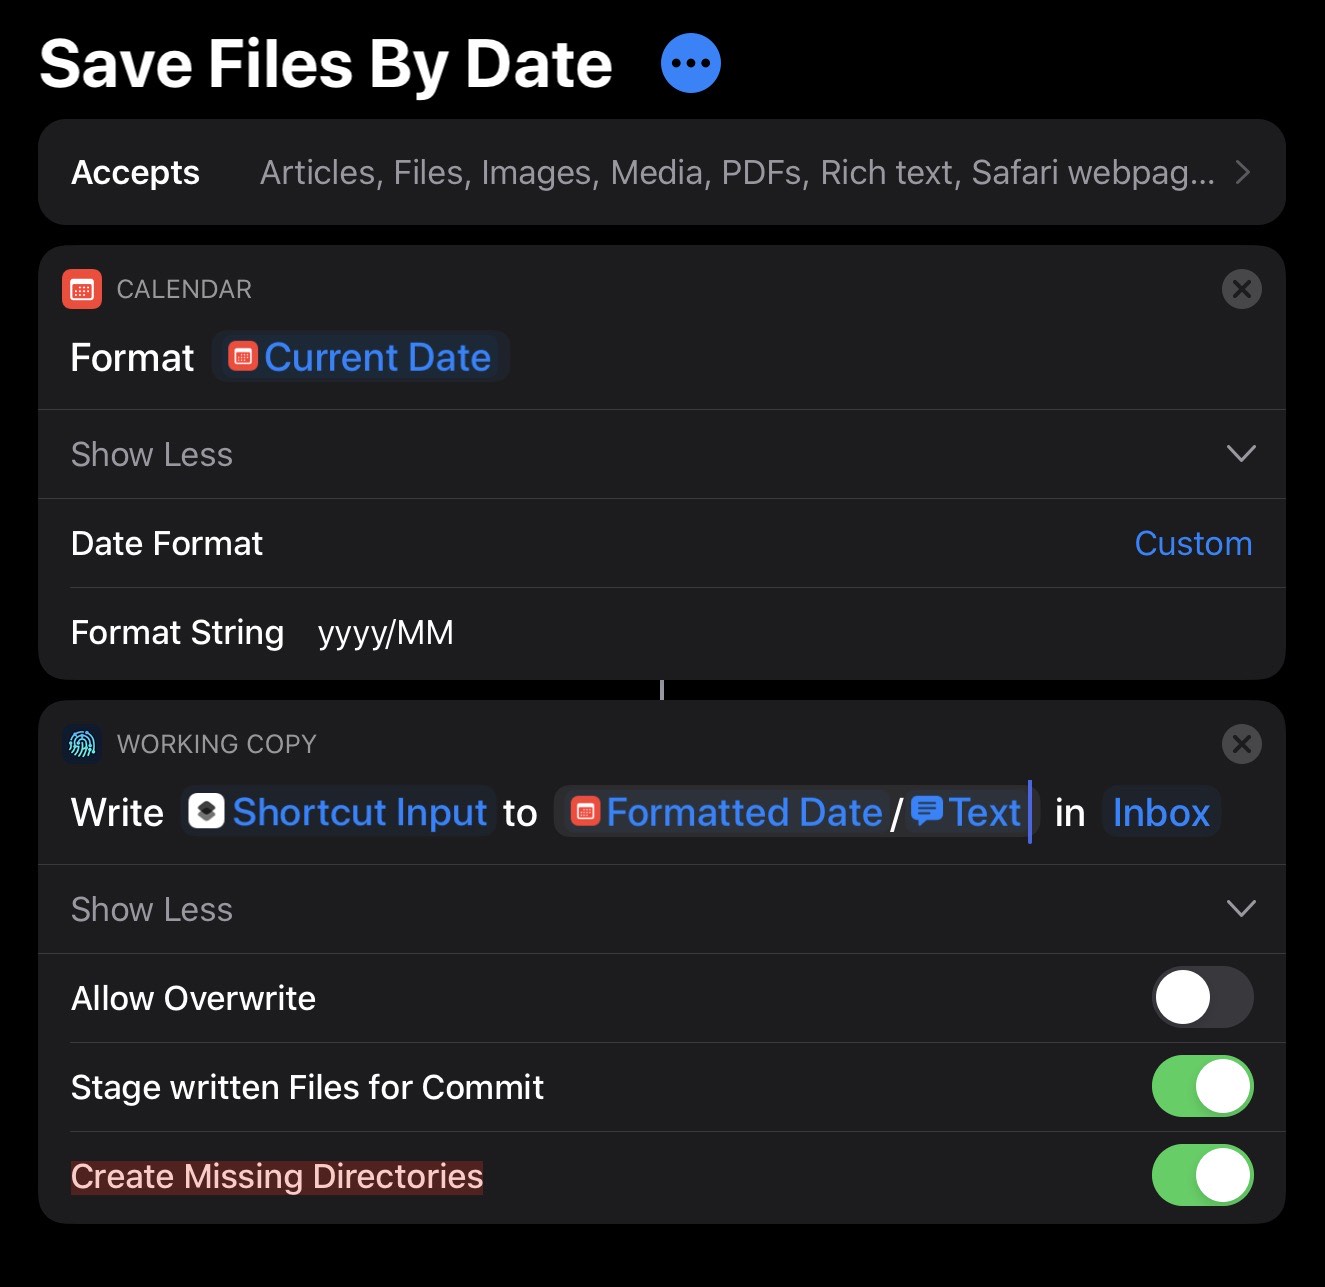 Shortcut: Save Files by Date